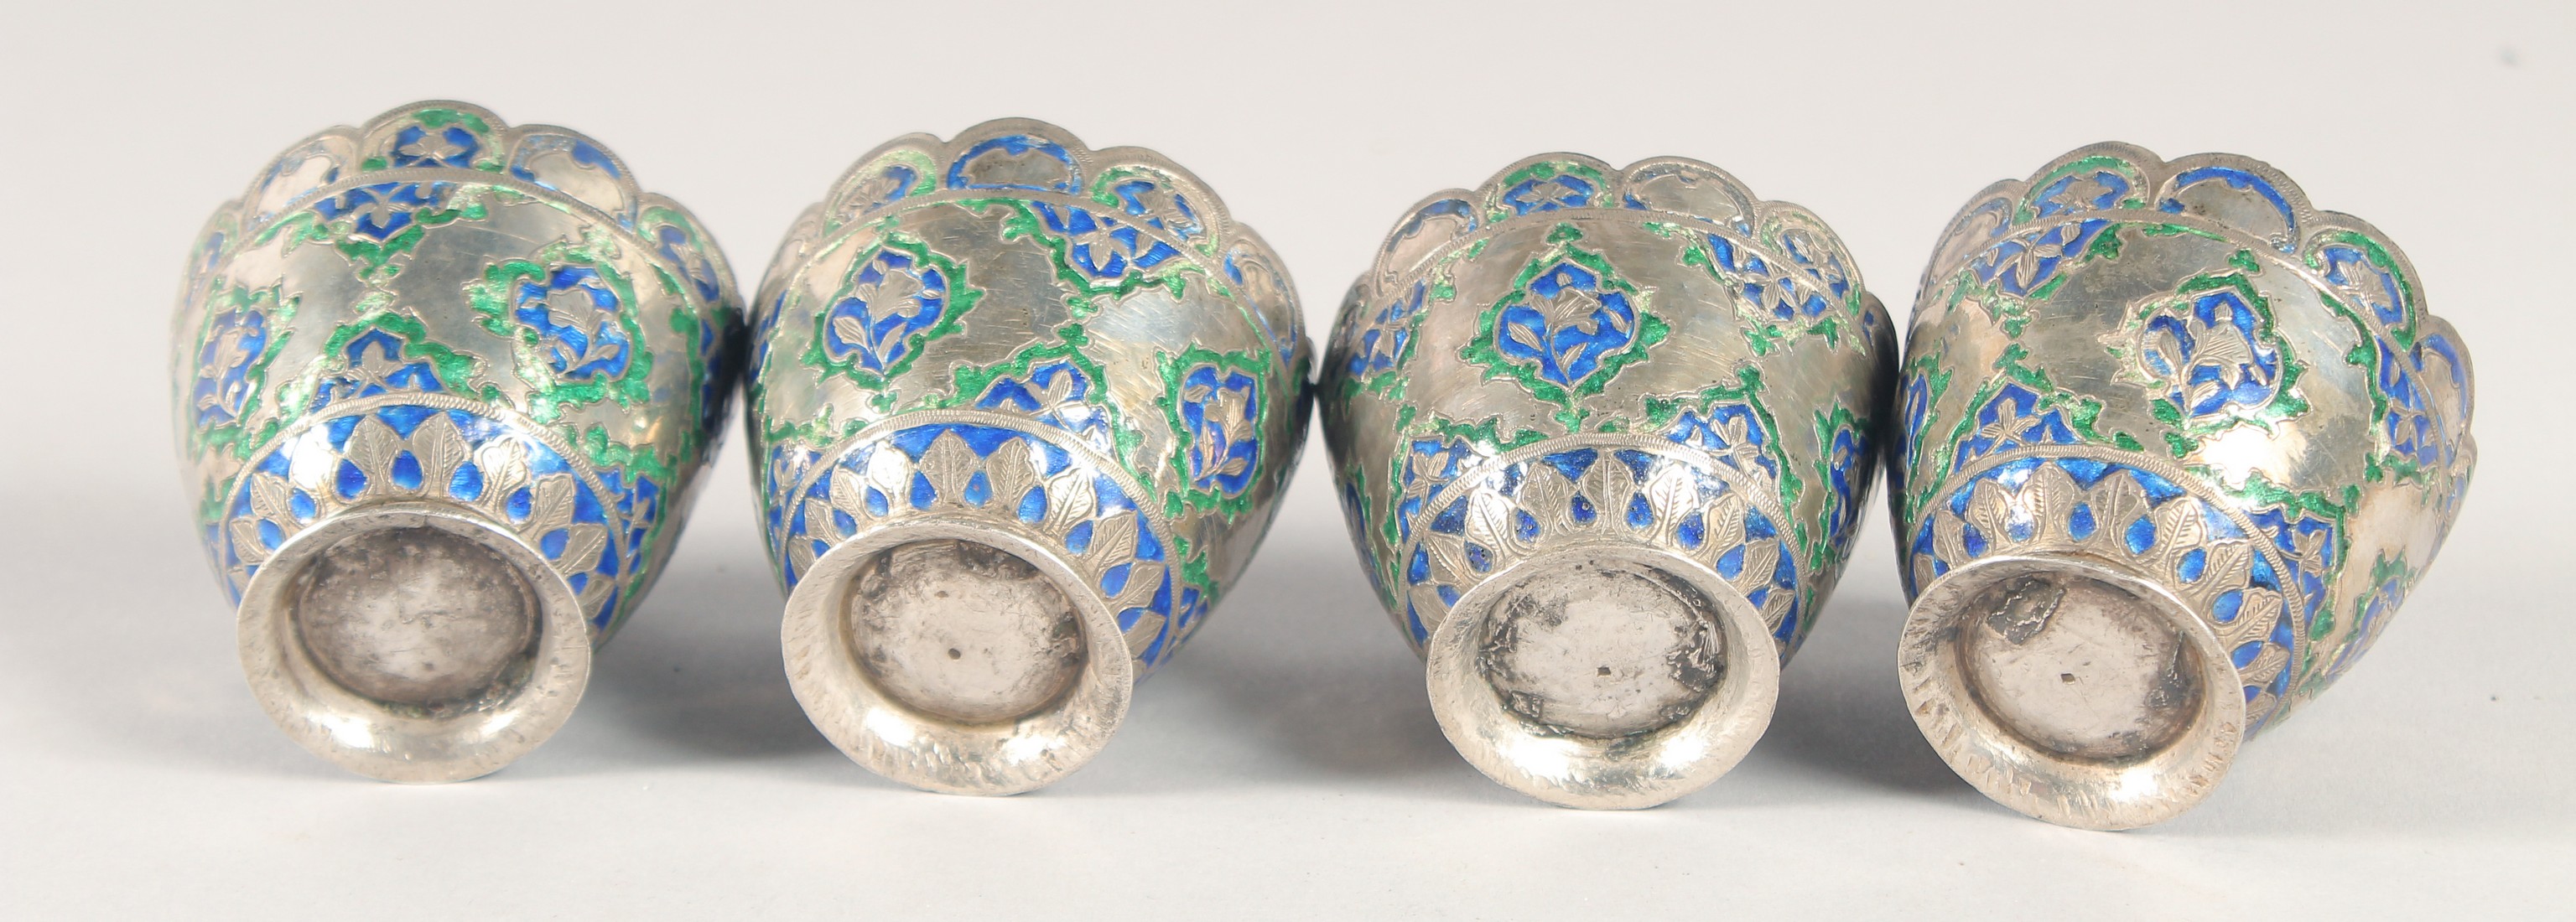 A FINE SET OF FOUR 18TH-19TH CENTURY INDIAN LUCKNOW ENAMELLED SILVER CUPS, 5.5cm diameter, (4). - Image 5 of 5